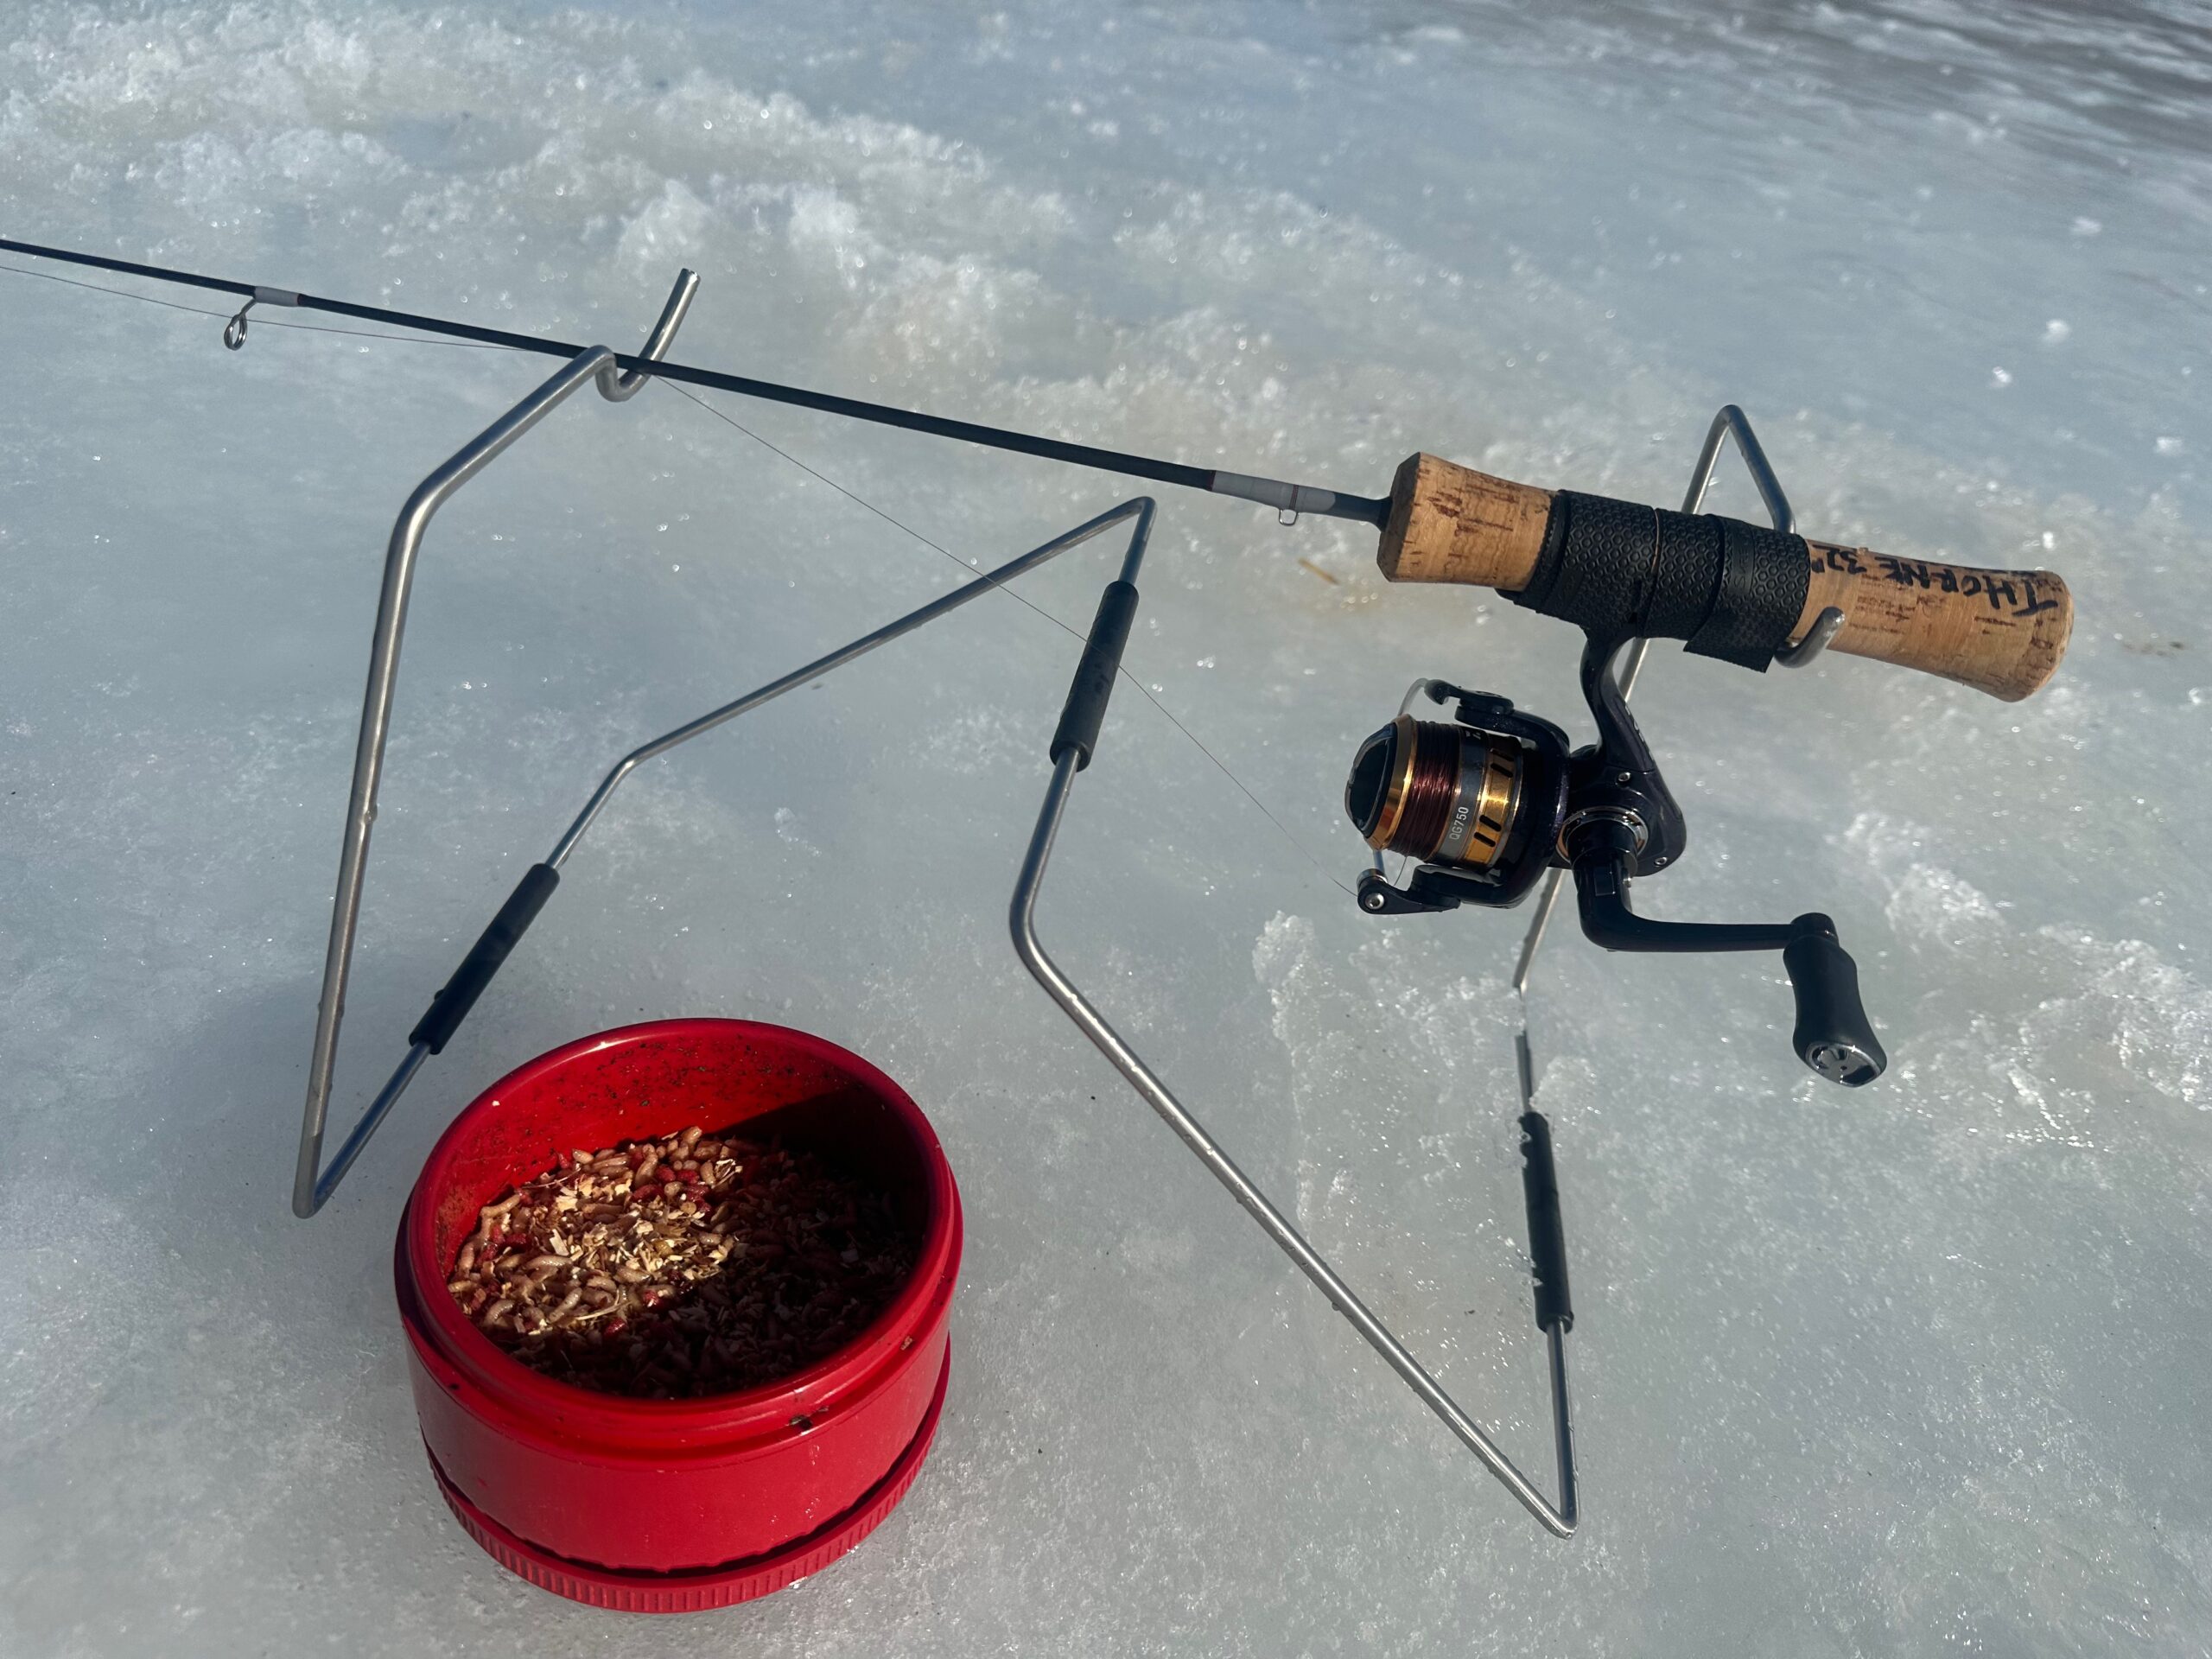 The best ice fishing rods tested.